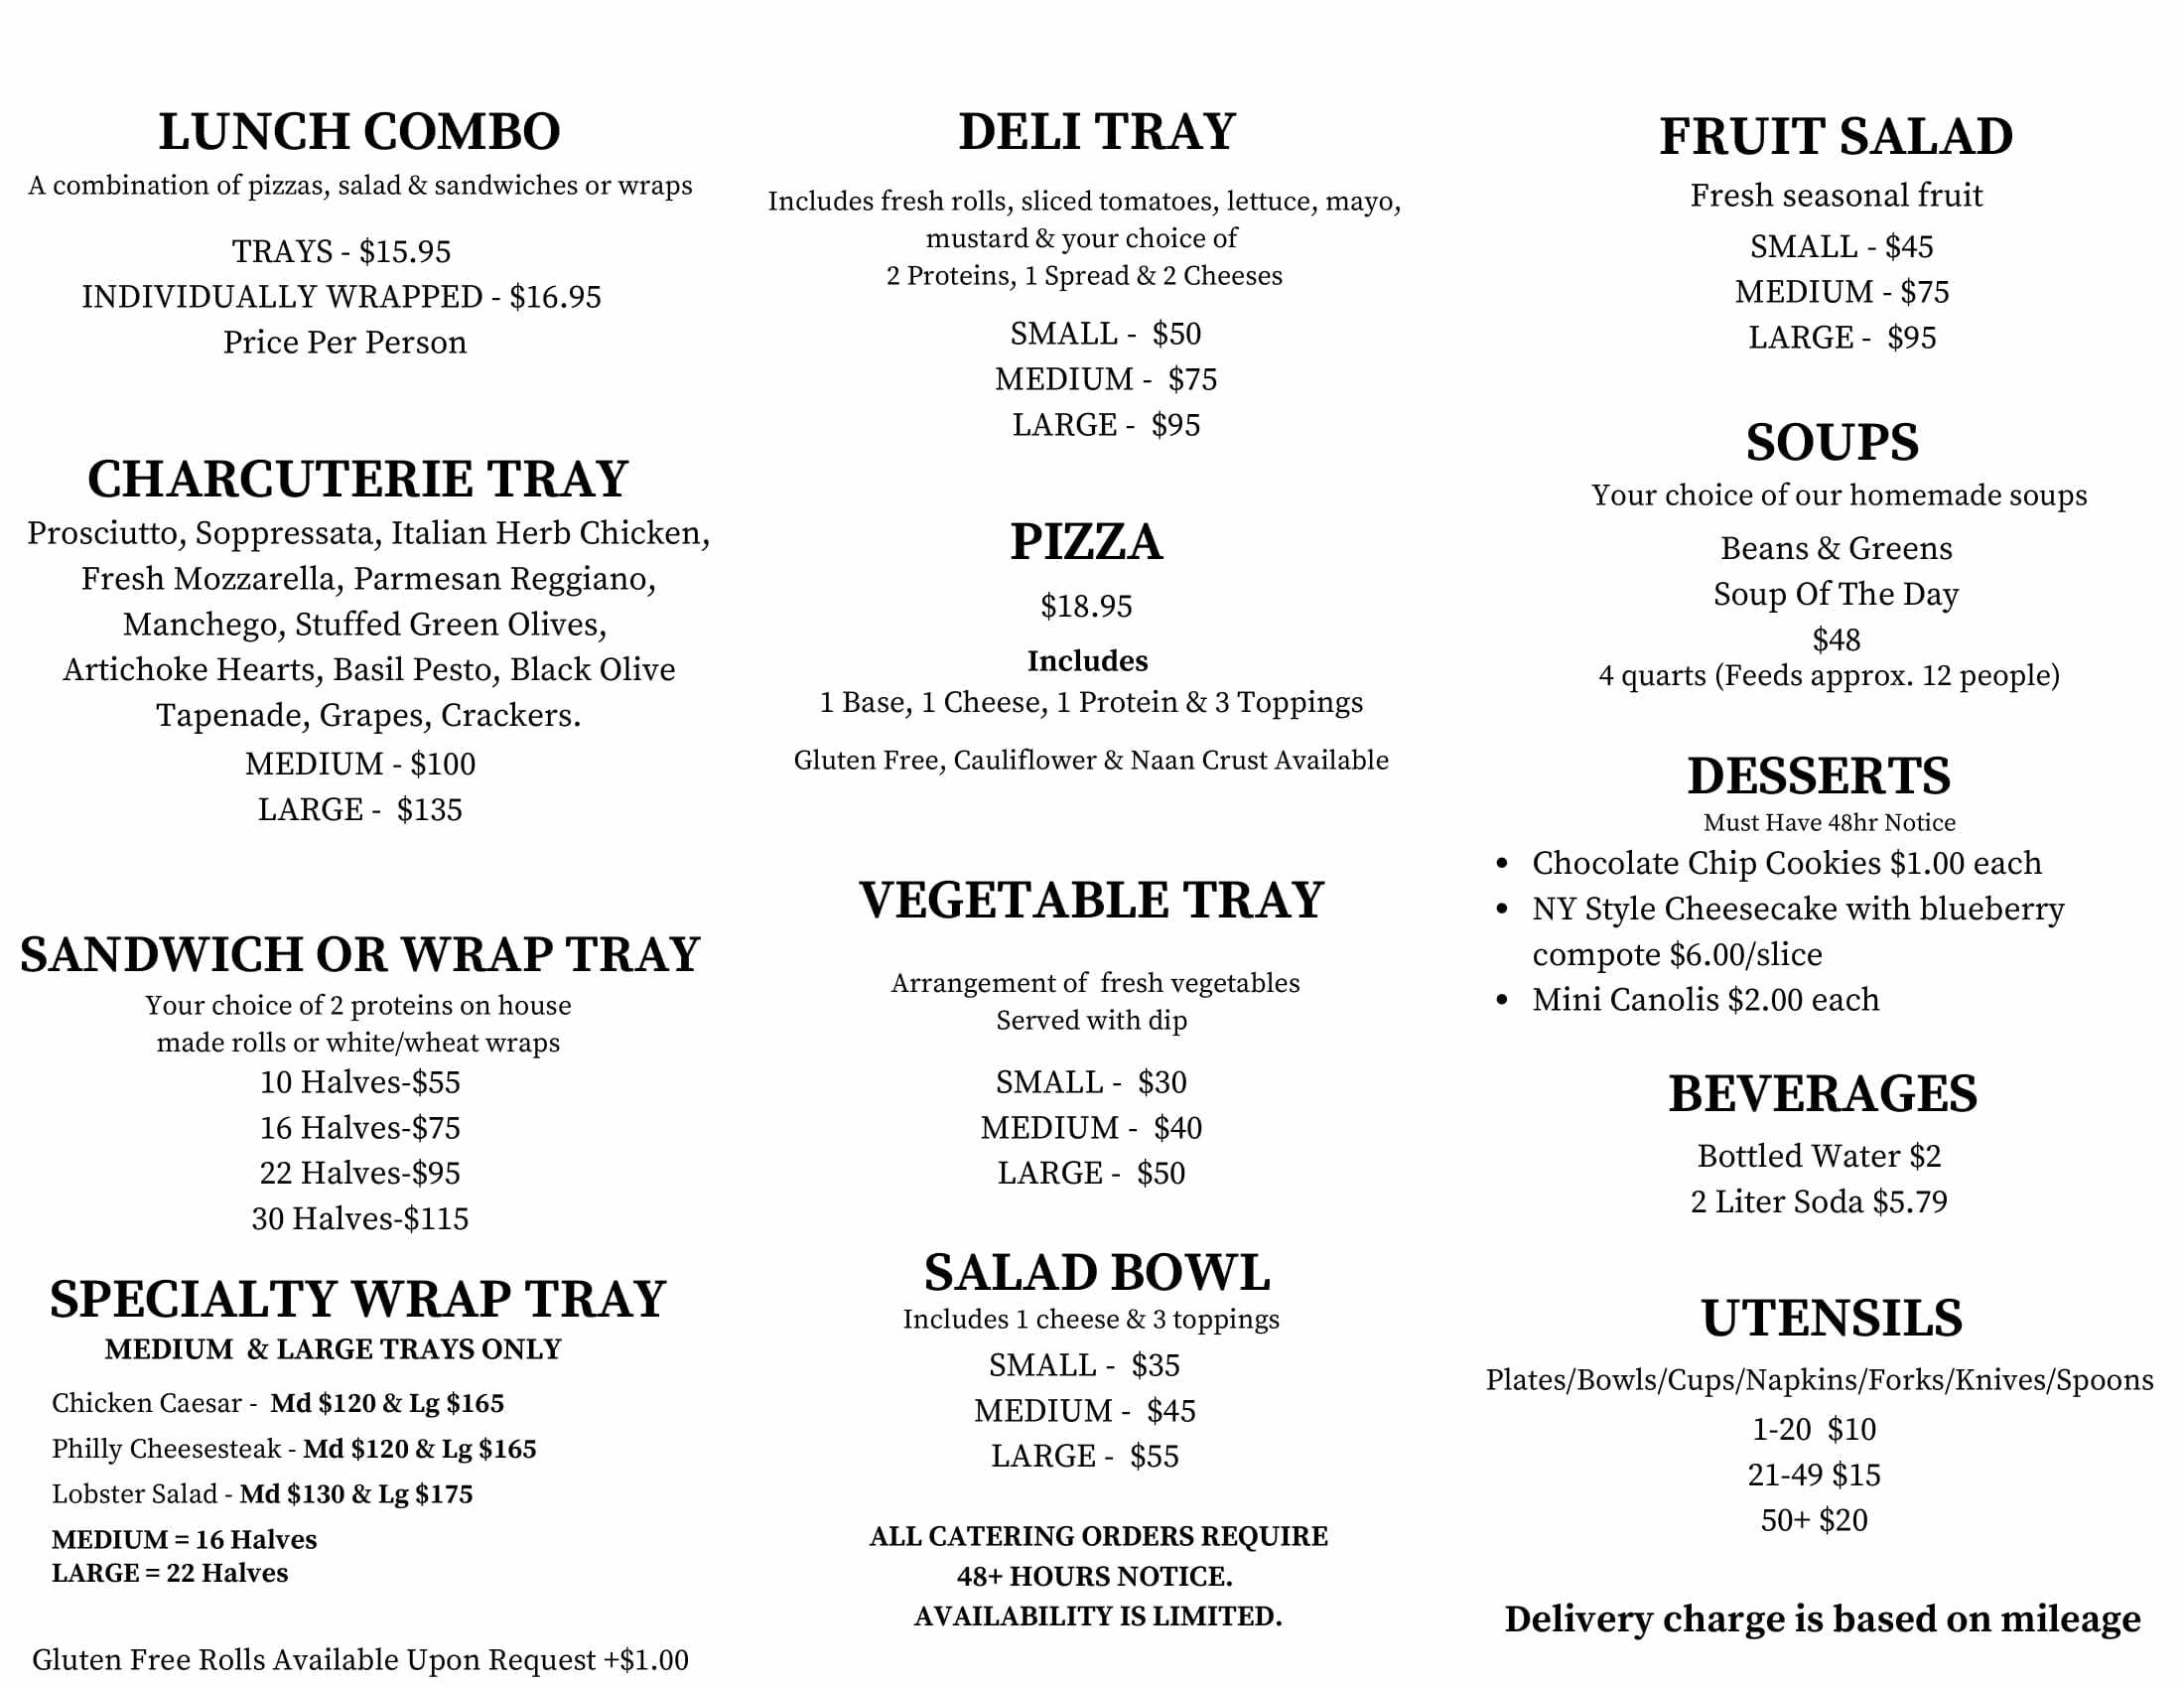 Davolois Catering menu image right